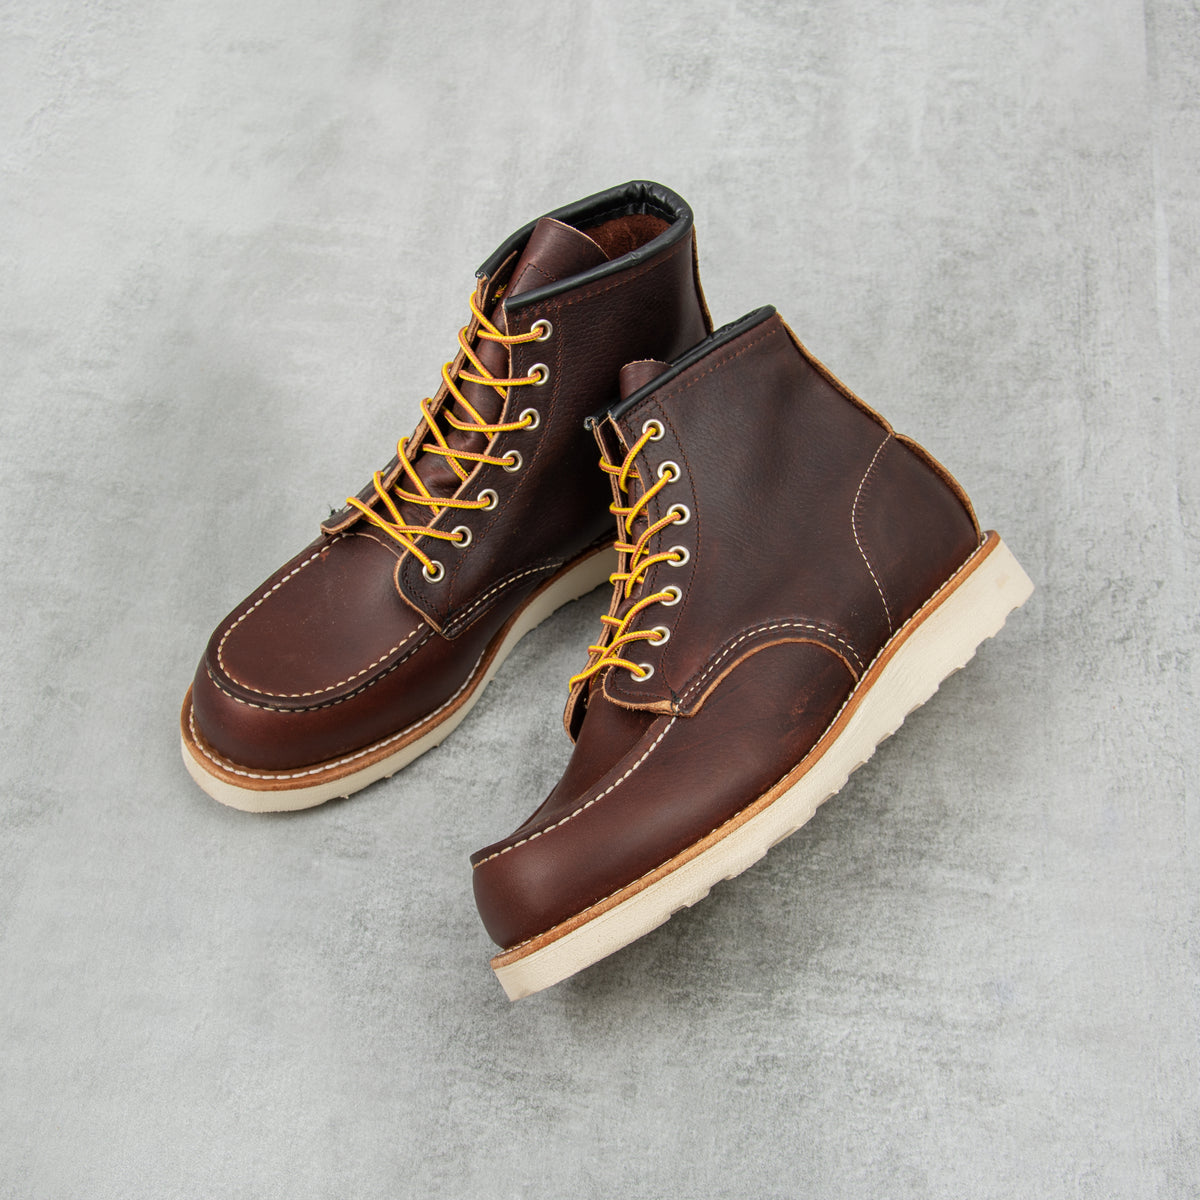 Buy the Red Wing Classic Moc Toe 8138 Boot - Brown @Union Clothing ...